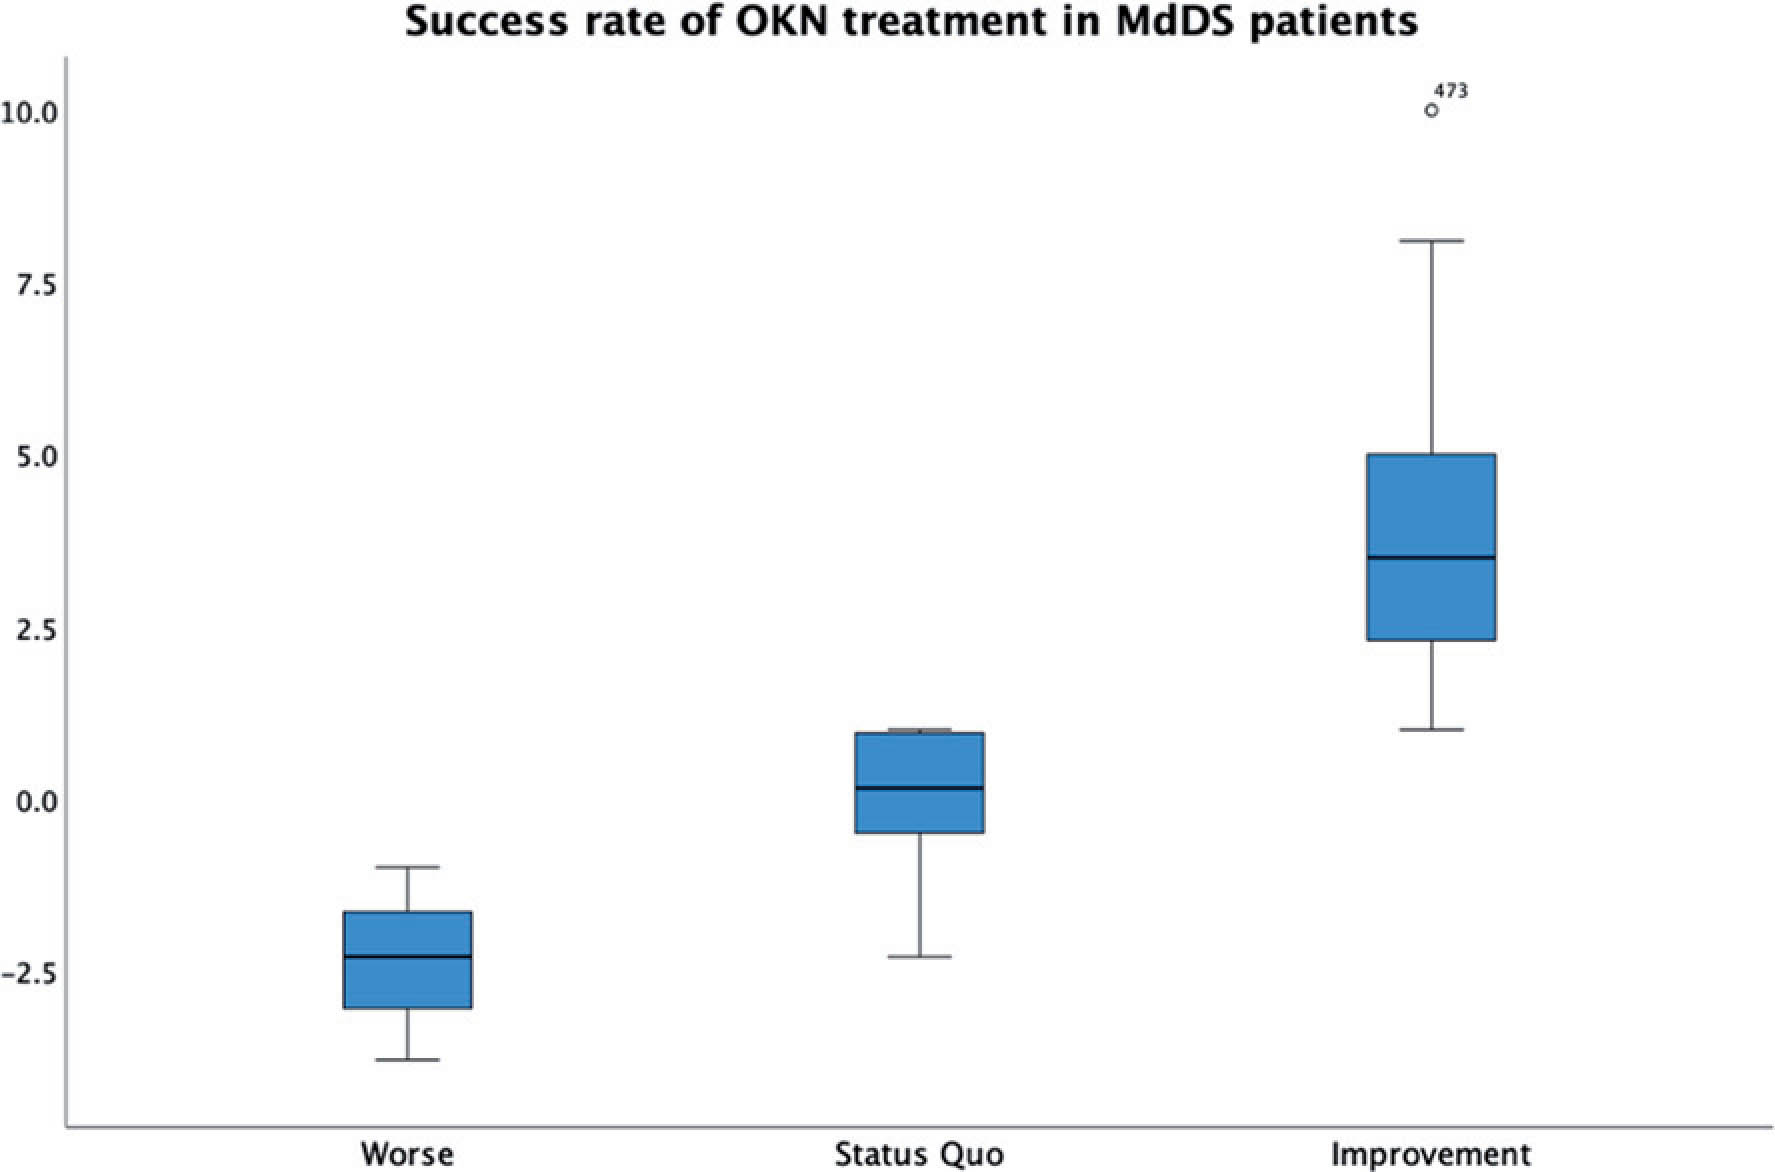 Success rate of the given OKN treatment in MdDS patients